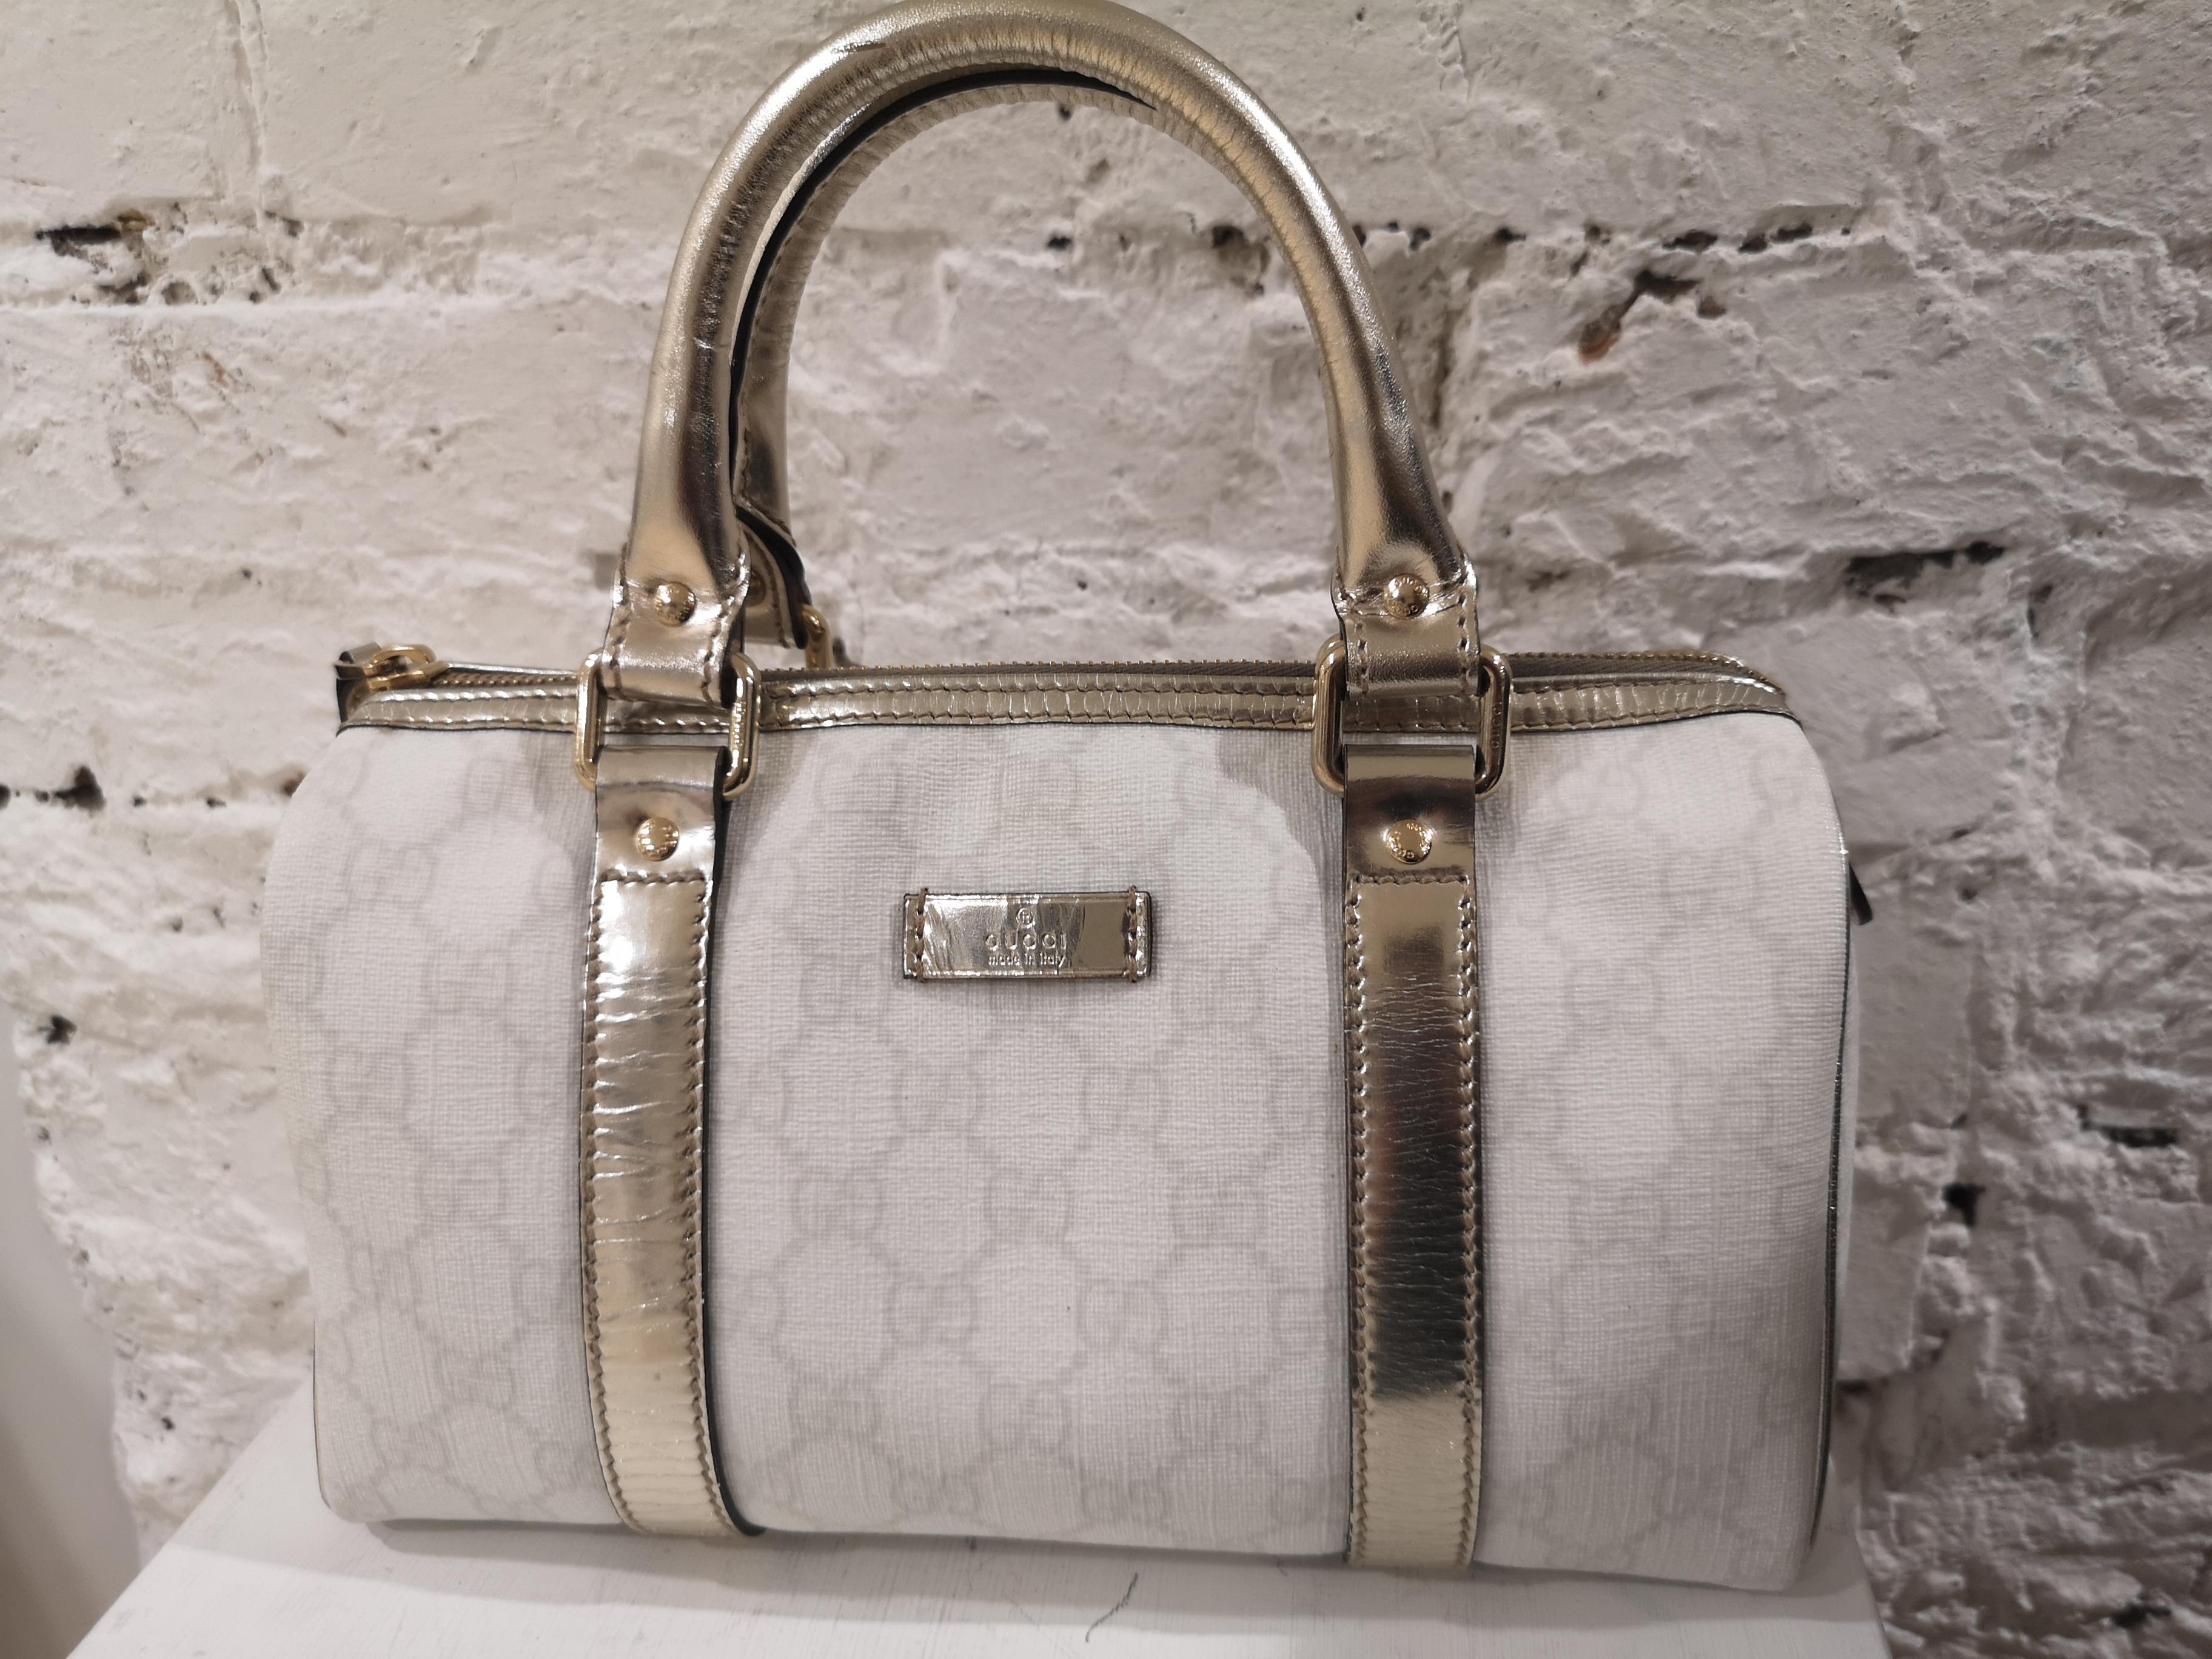 Gray Gucci white gold leather hardware speedy case bag